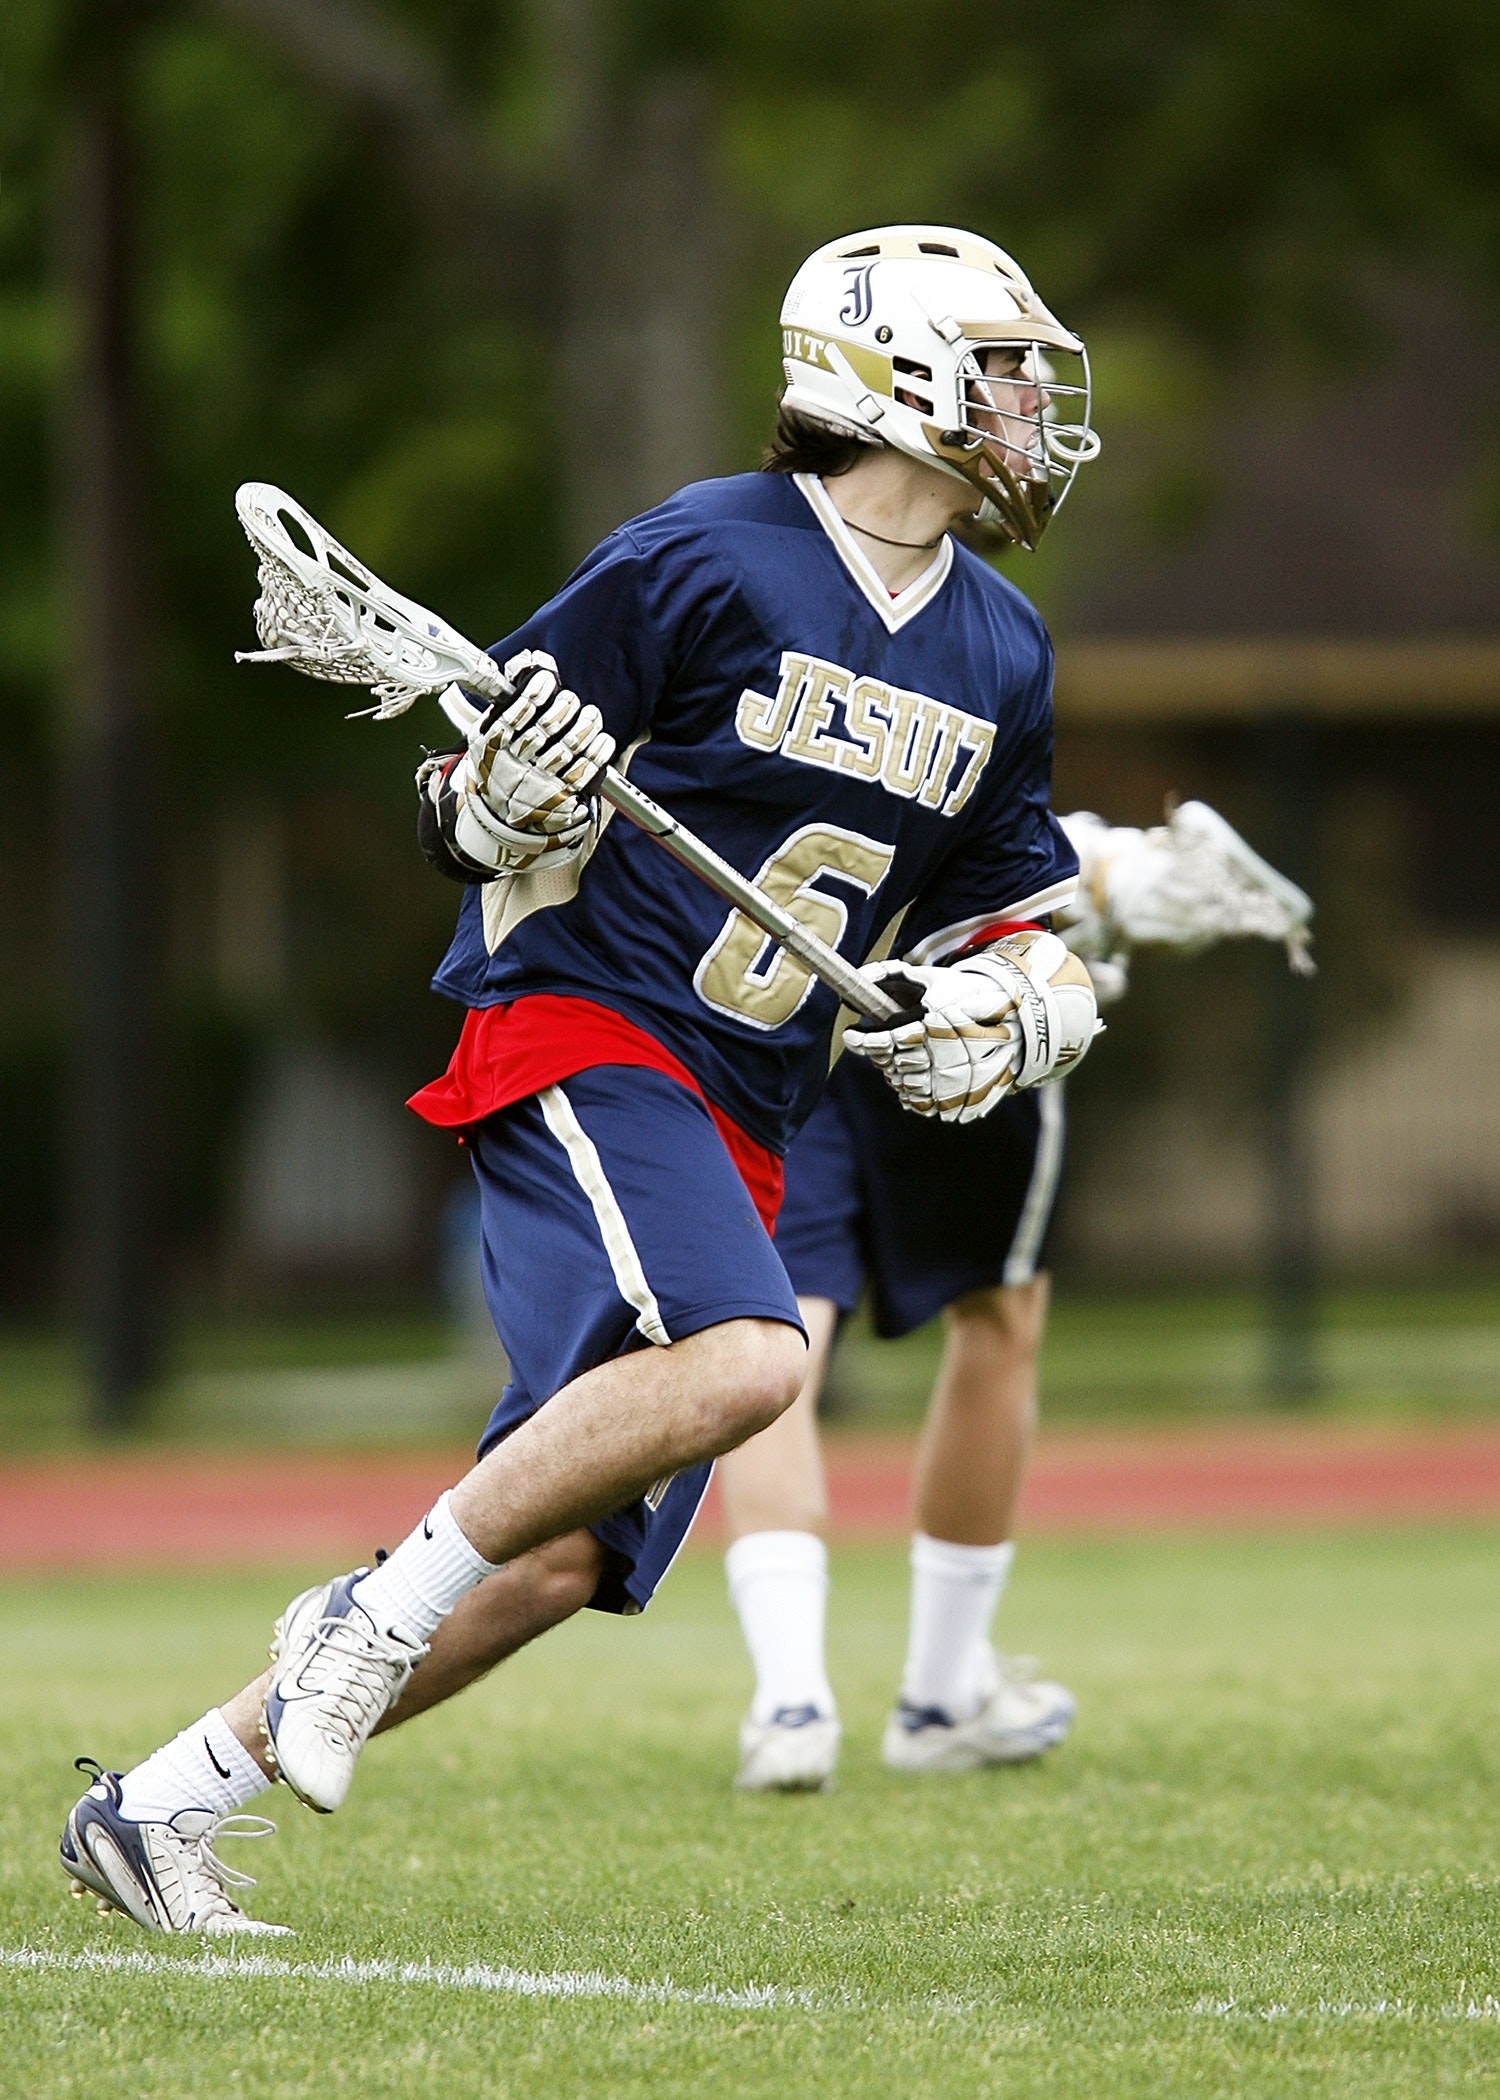 Man in Blue and White Jersey Playing Lacrosse, Outfit, Young, Wear, Uniform, HQ Photo